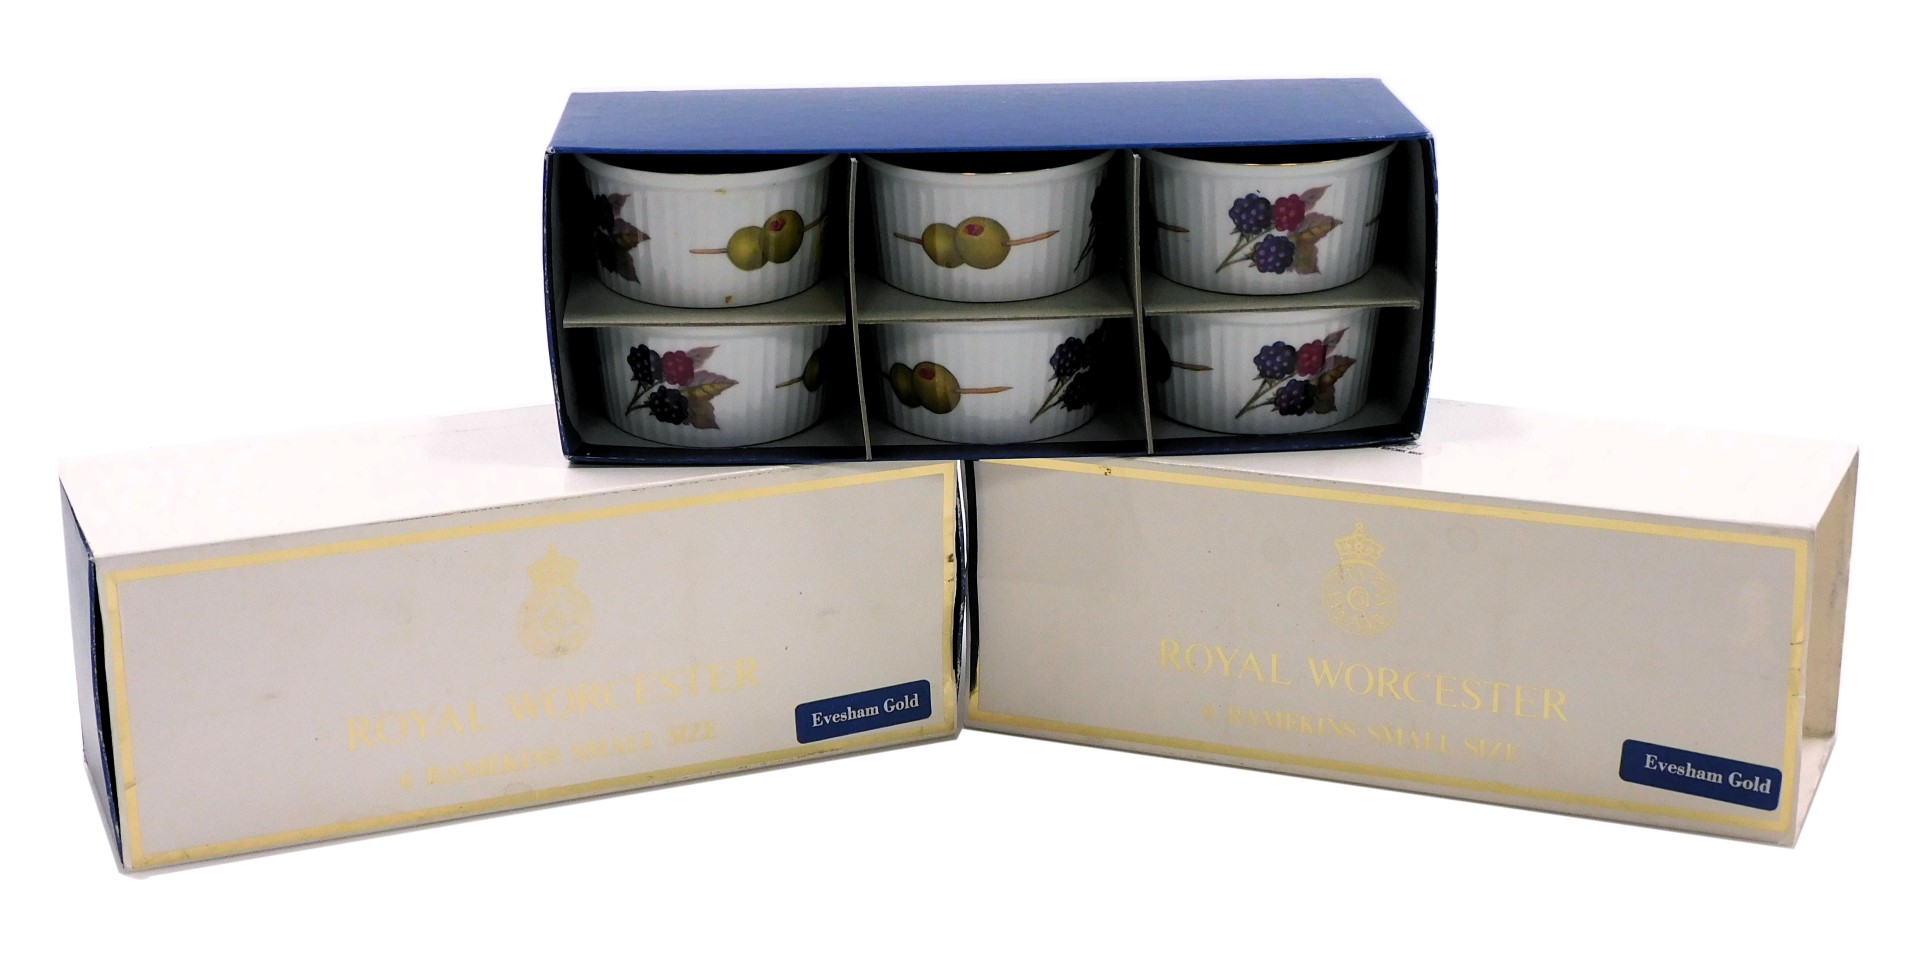 Twelve Royal Worcester Evesham Gold pattern ramekins, small size, in two boxes.